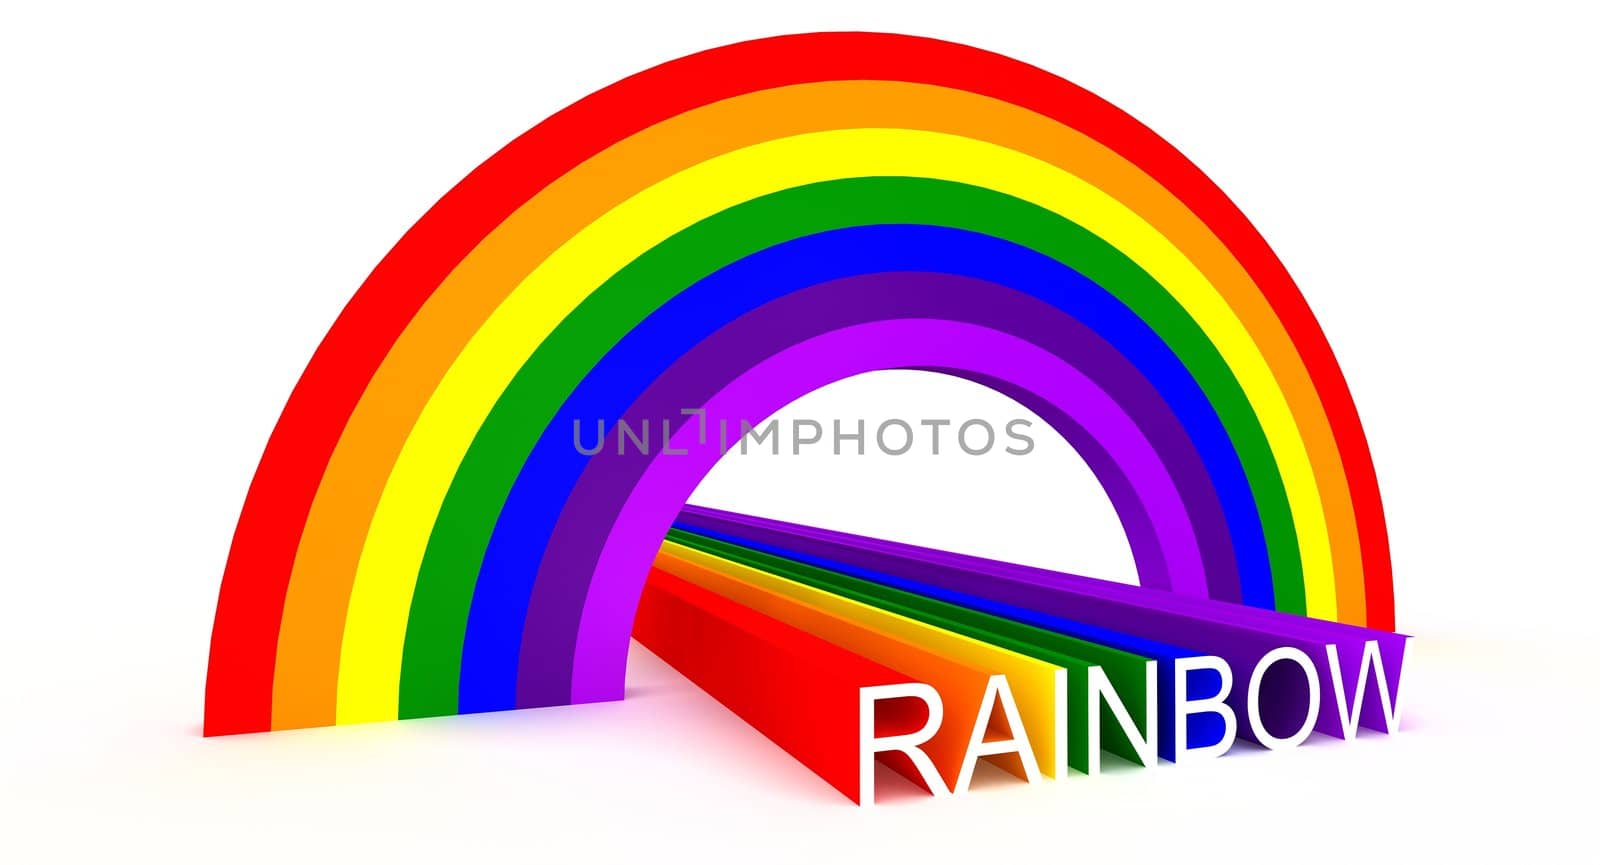 Educative concept showing rainbow colors in an intuitive and imaginative way with addition of correct English spelling of Rainbow word. Idea of illustration is portrayed by arc consisting of seven basic rainbow colors. Red, orange, yellow, green, blue, indigo and violet. Scene rendered and isolated on white background.